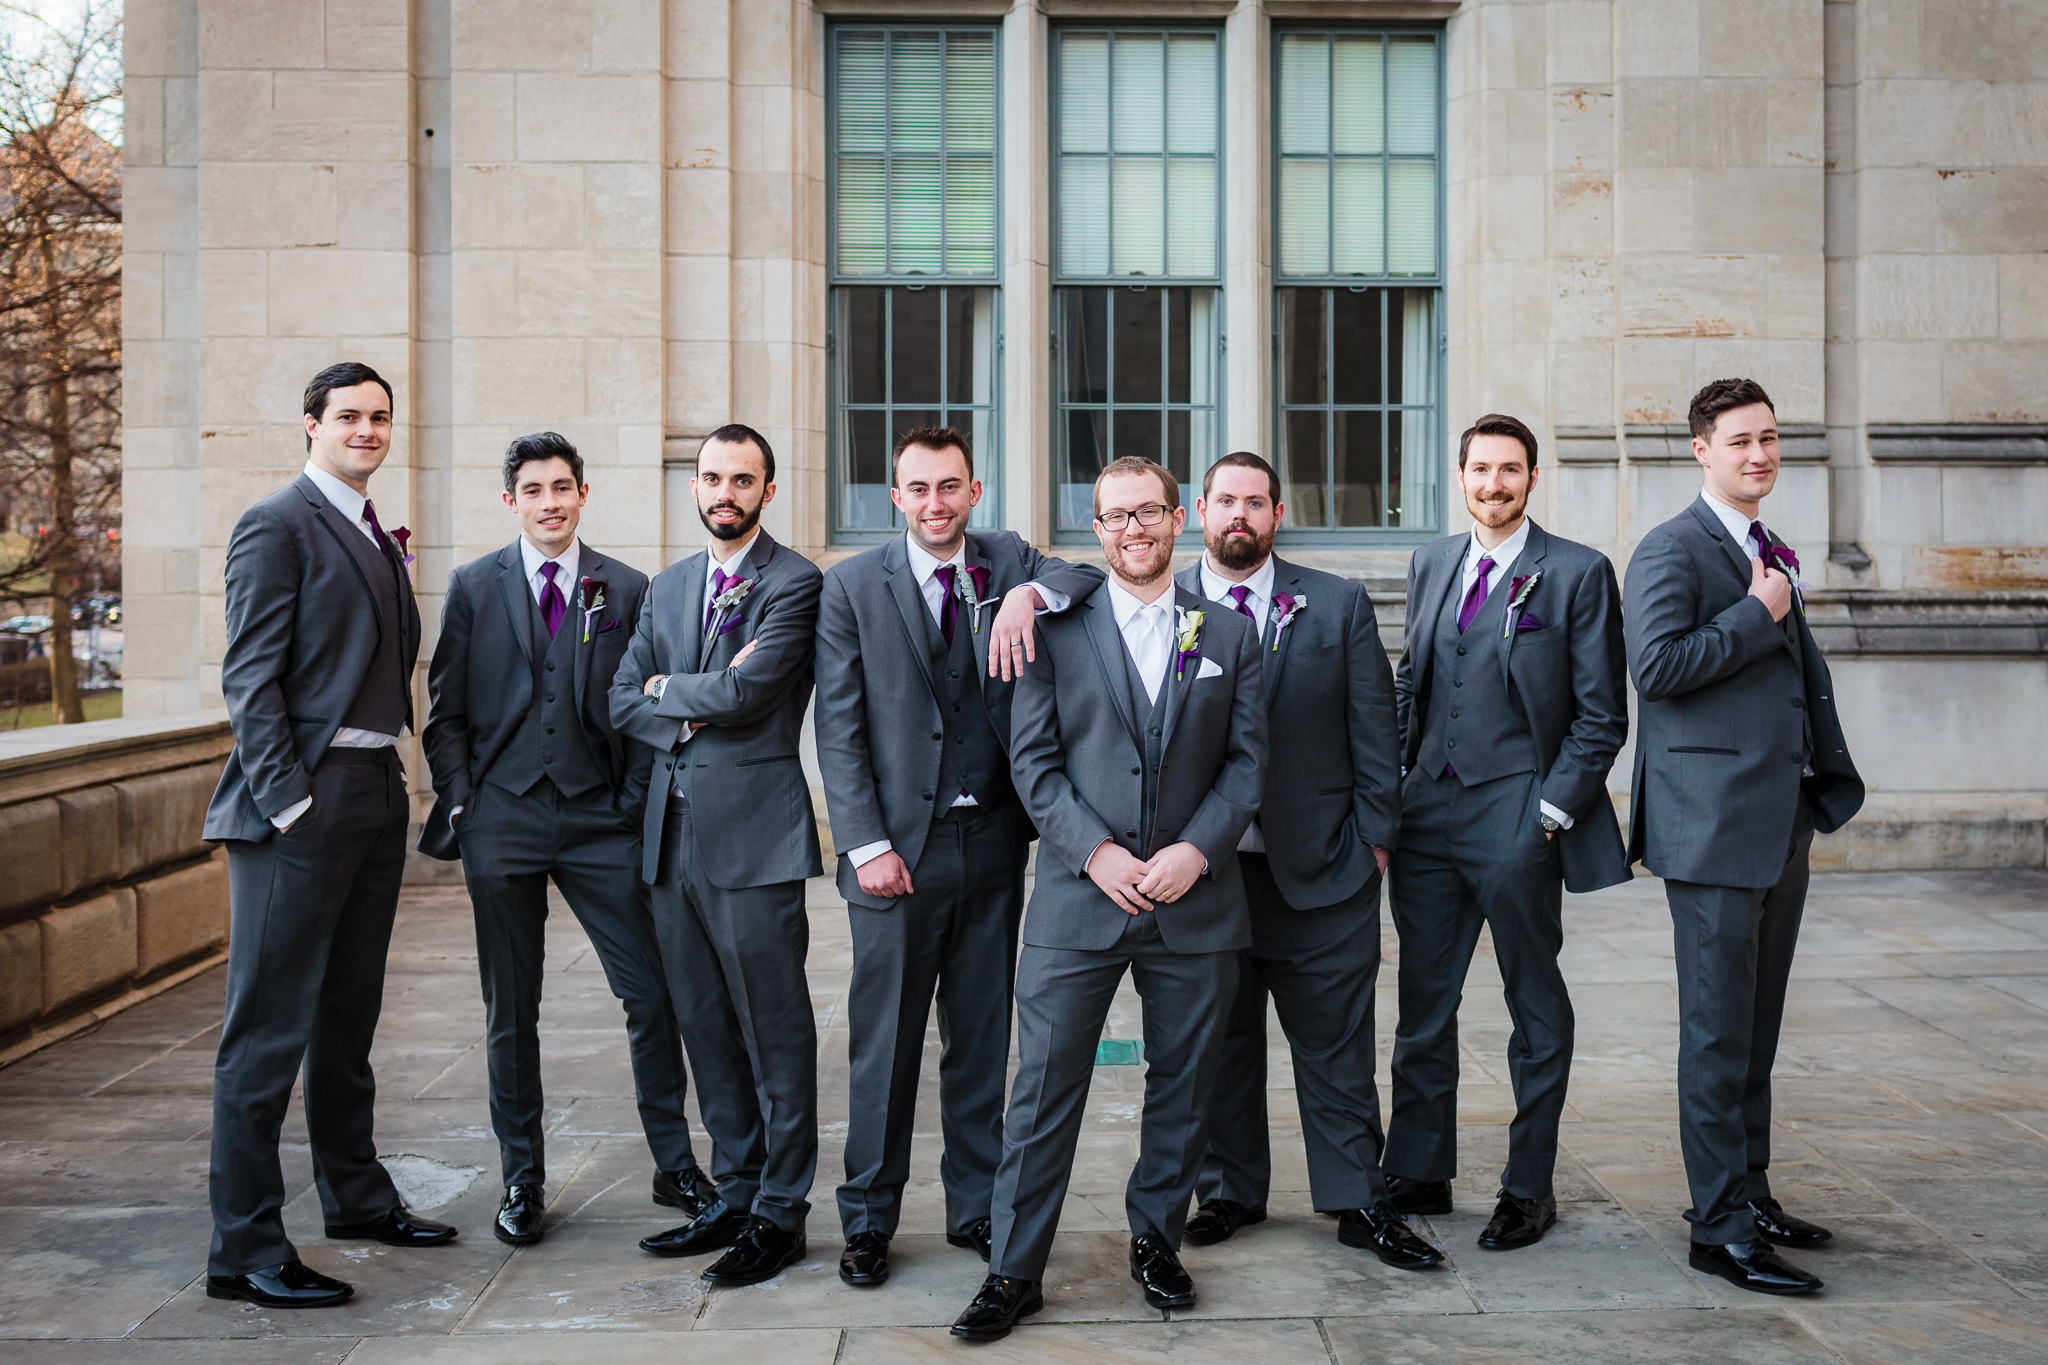 Groomsmen pose on the patio of the Cathedral of Learning in Pittsburgh